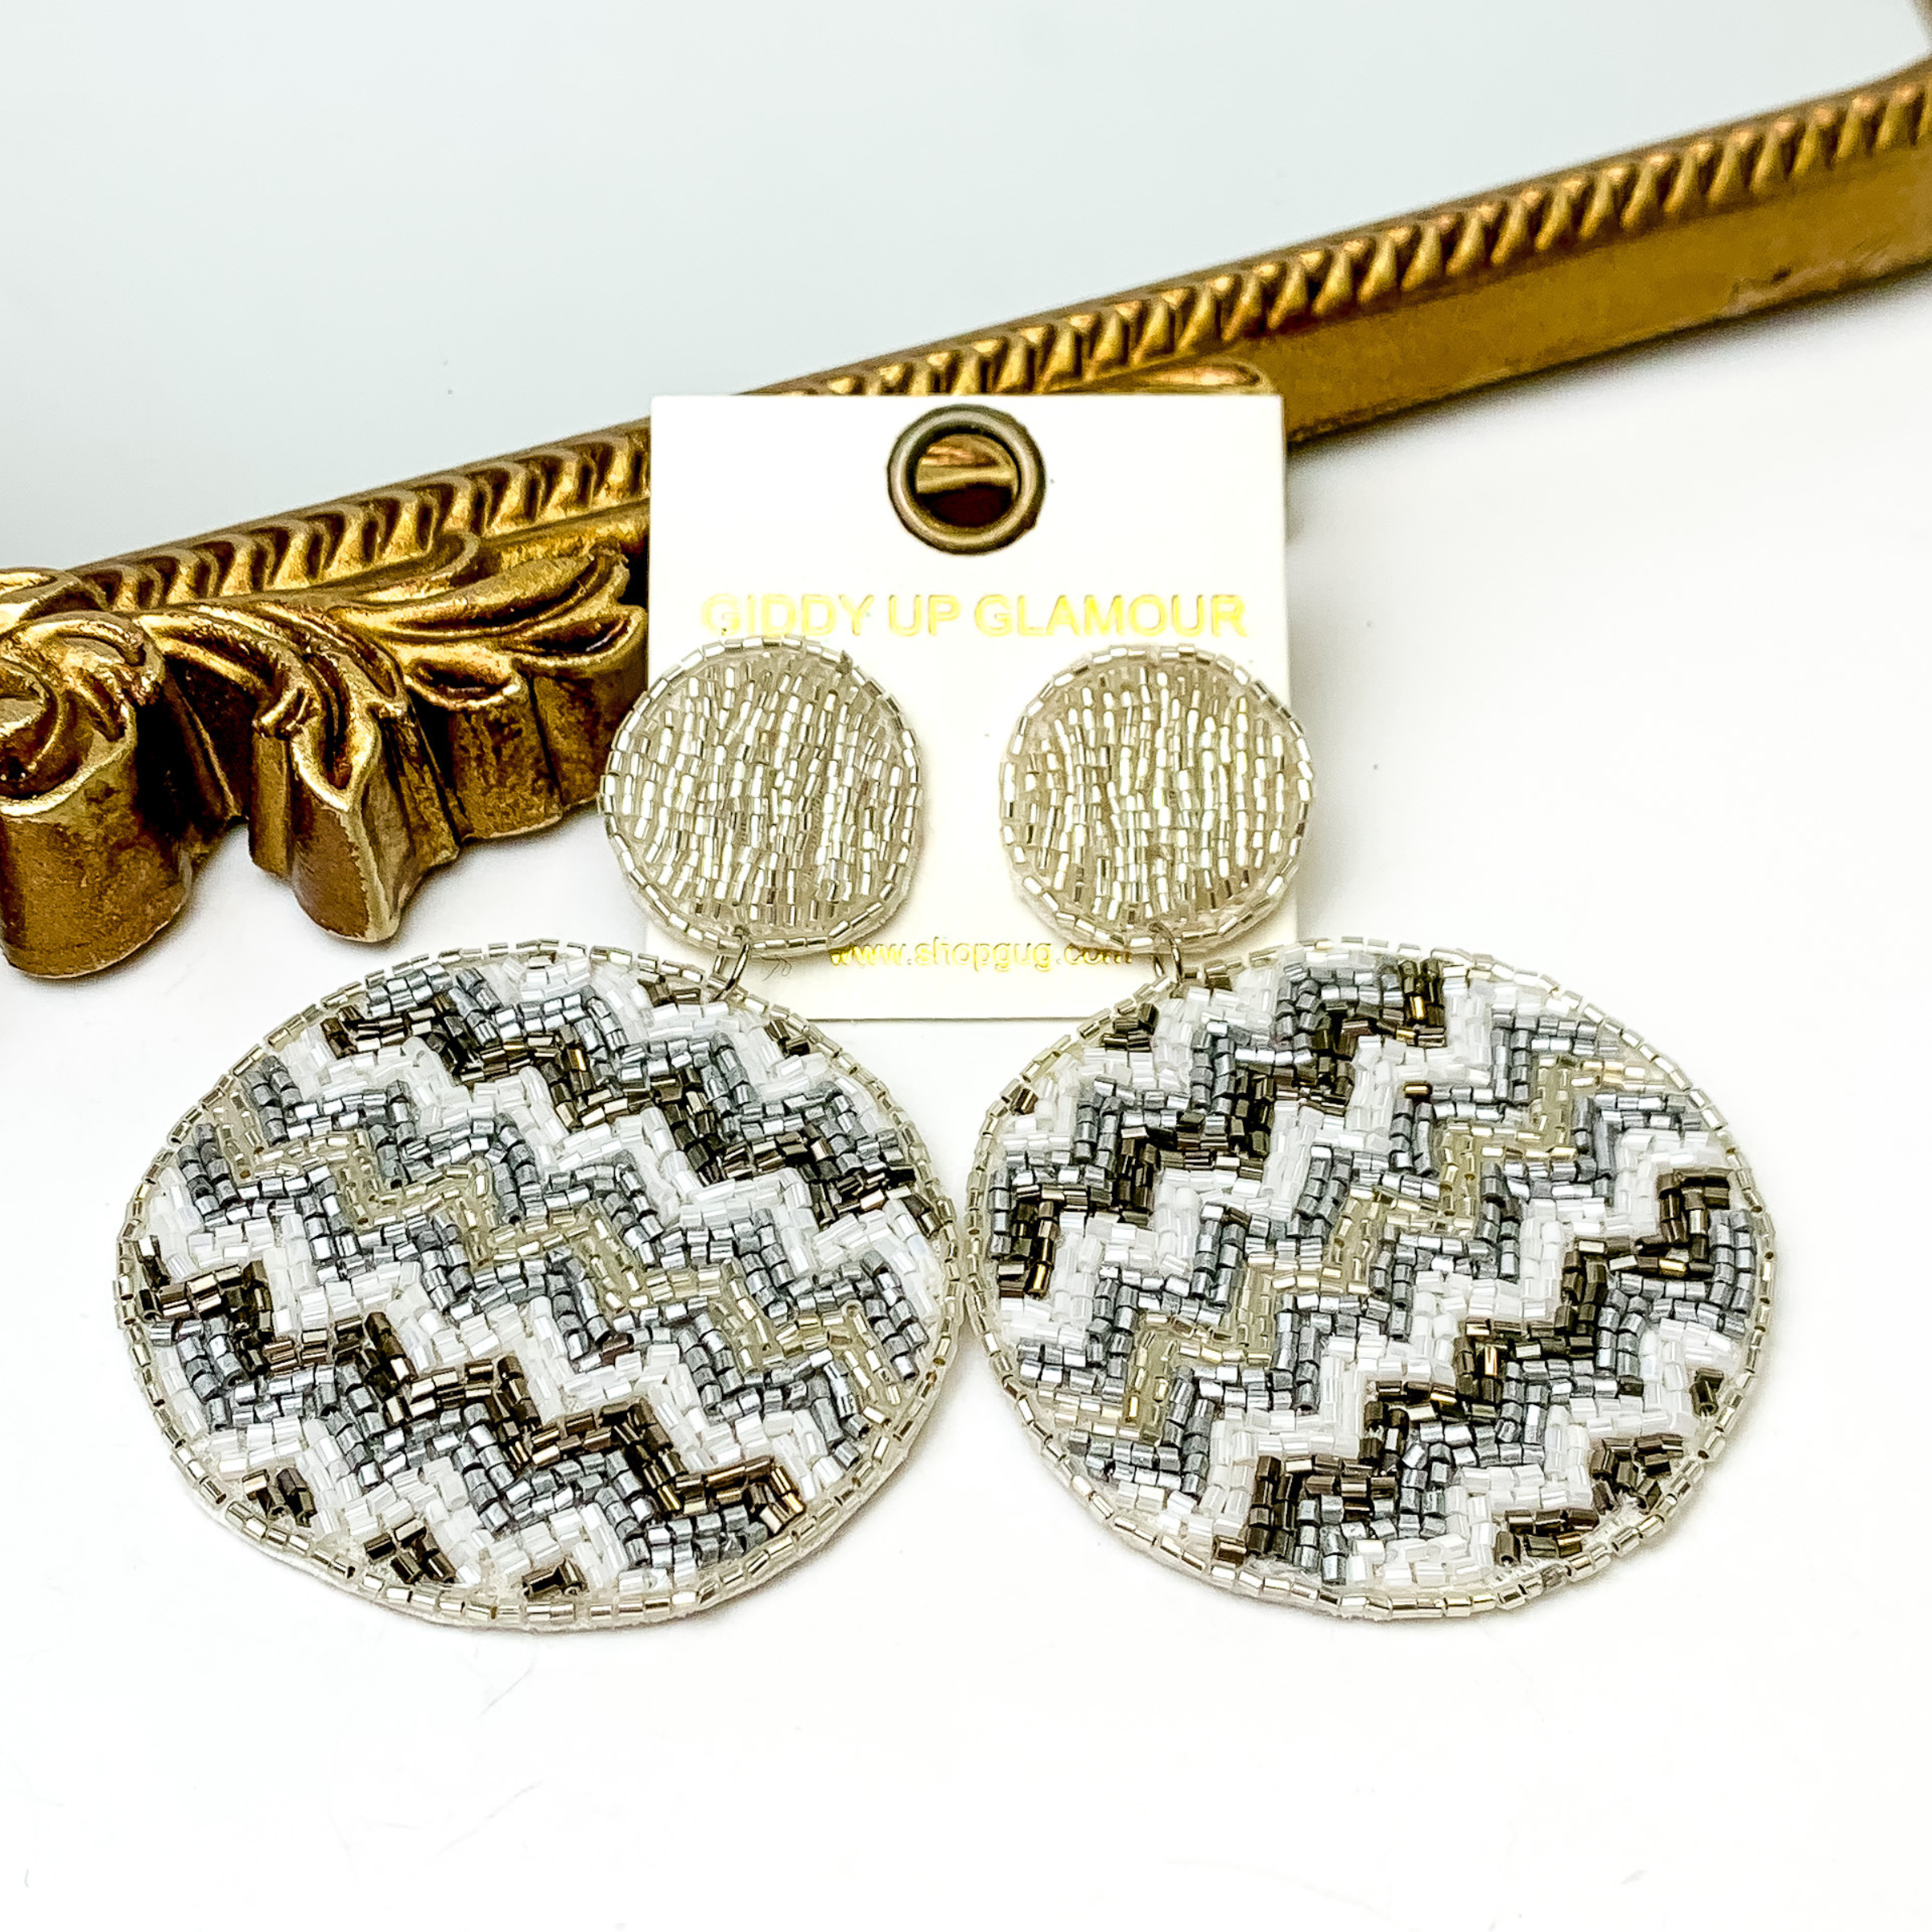 These are circle post back, light silver beaded earrings with a beaded circle drop. These earrings include a chevron pattern with white beads, silver beads, dark silver beads and light silver beads. These earrings are pictured in front of a gold mirror on a white background. 